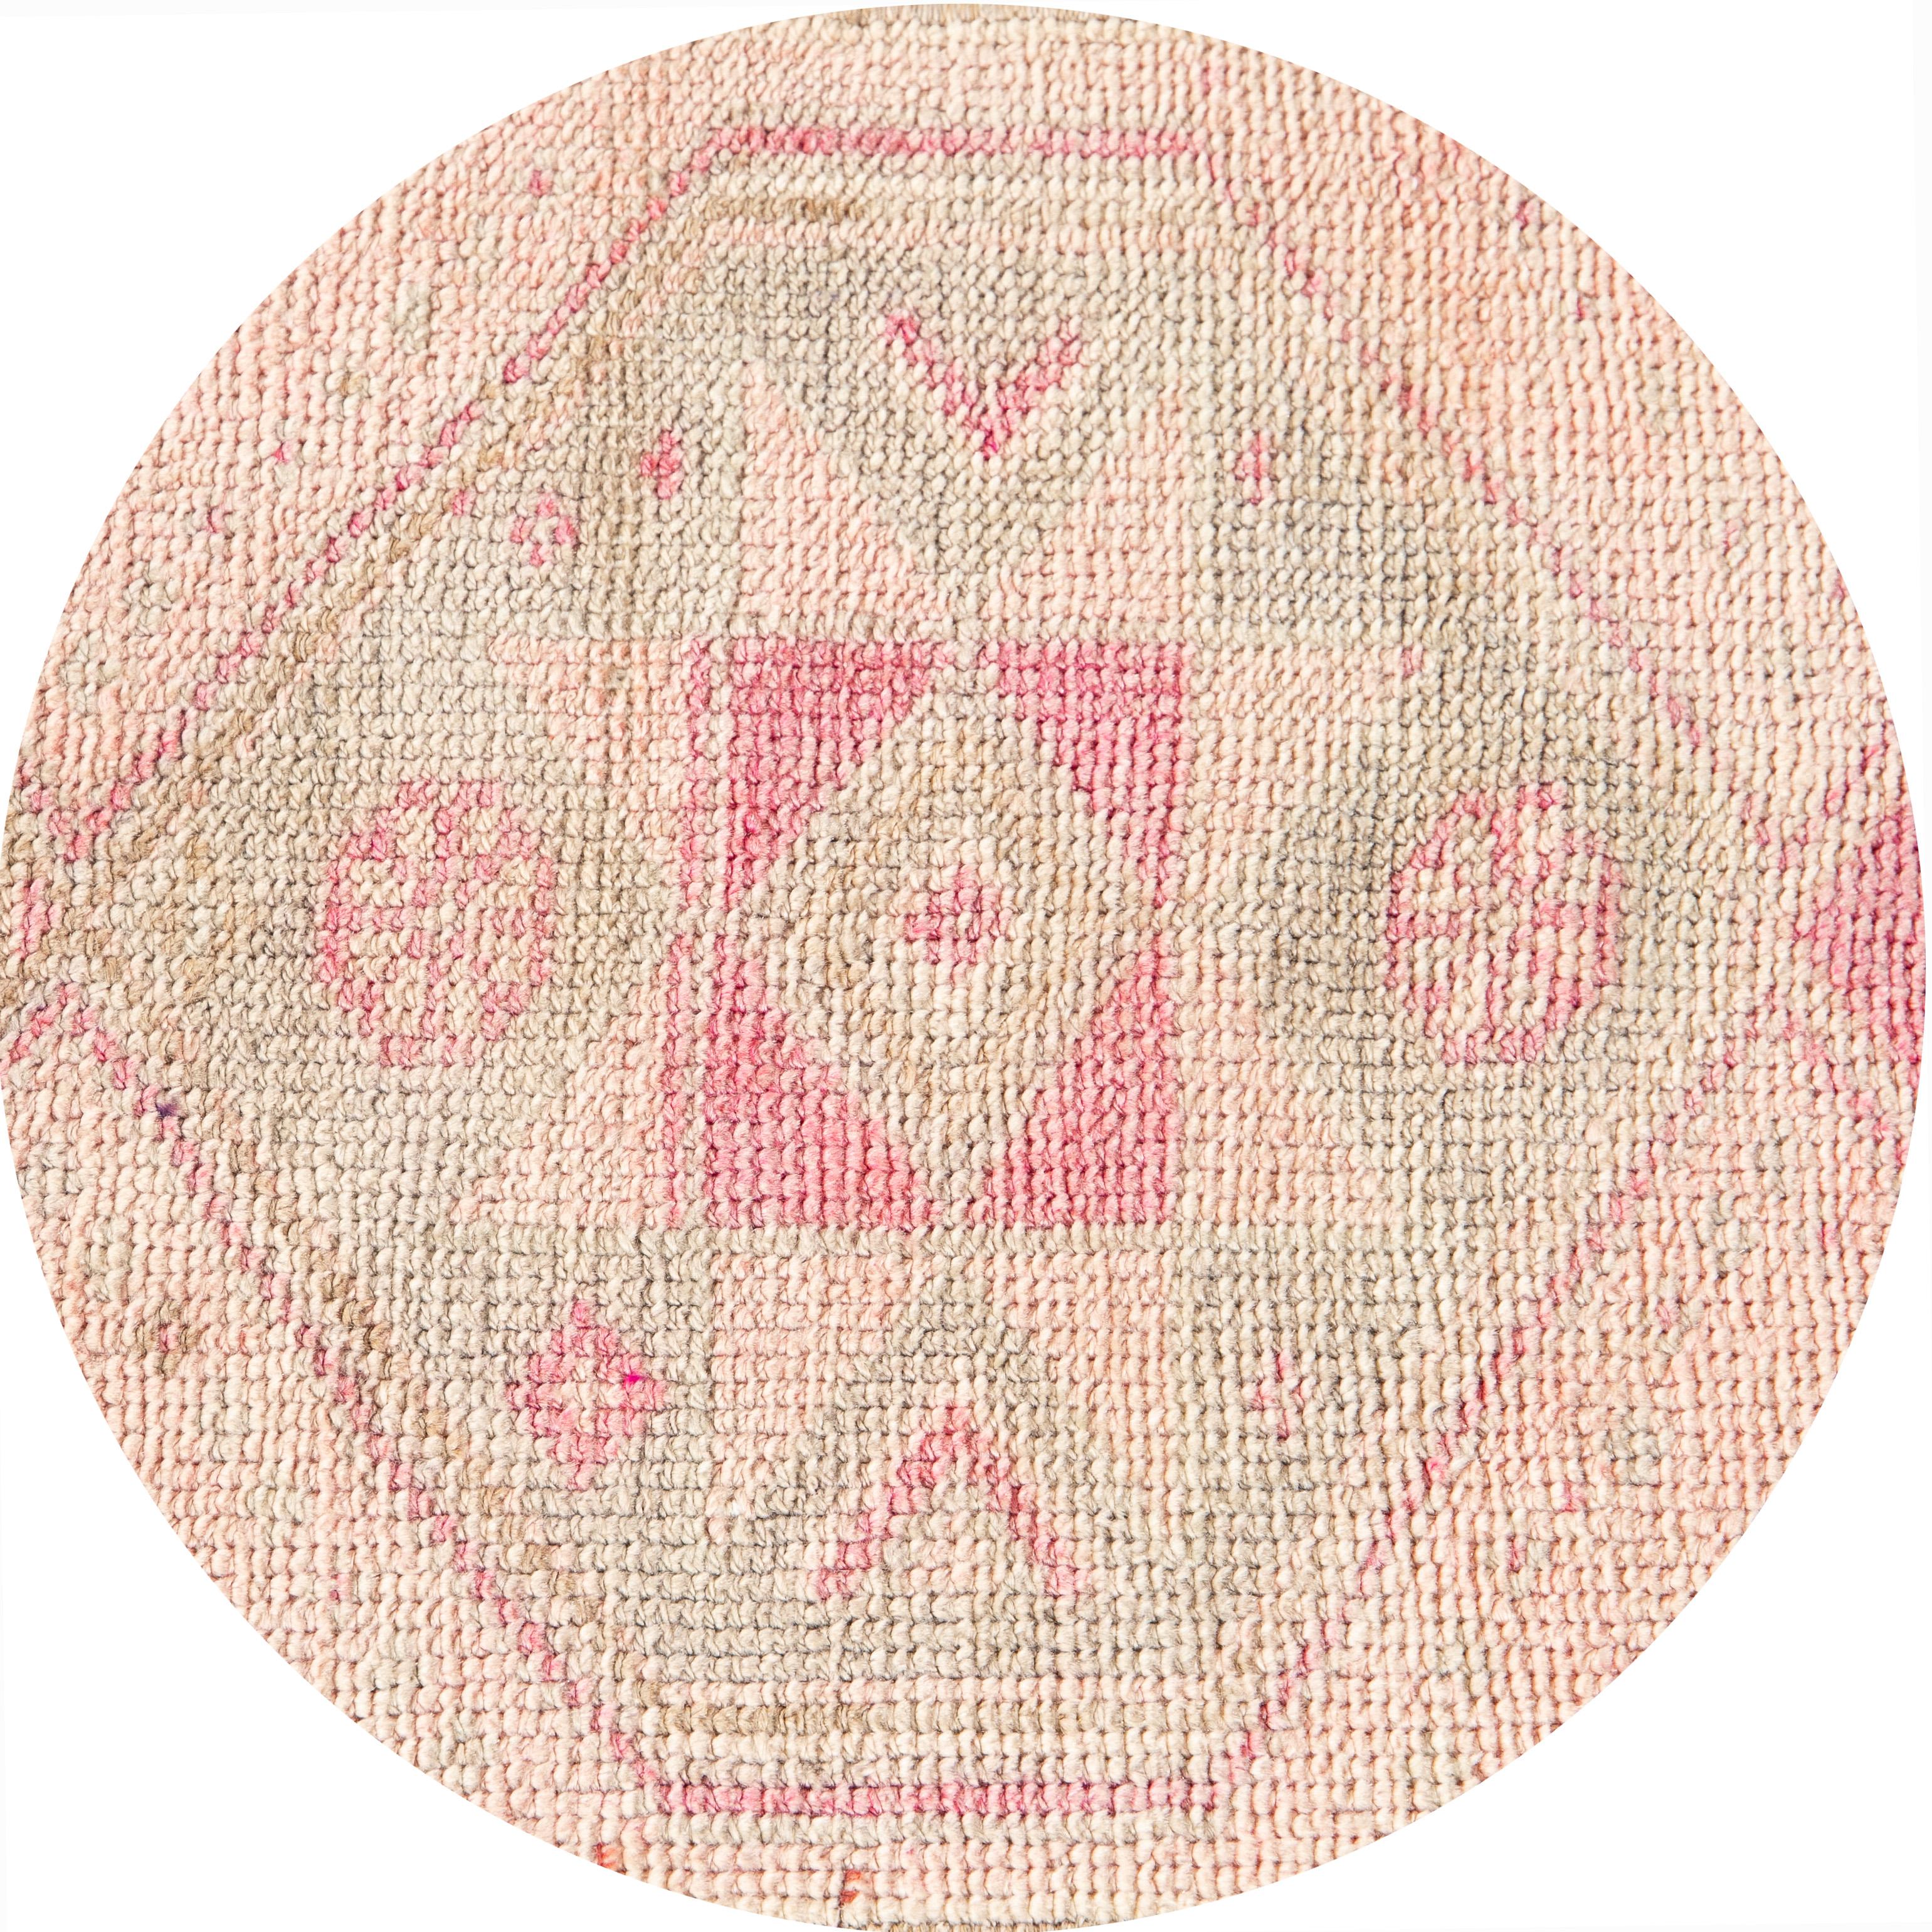 Beautiful vintage runner rug, hand-knotted wool with a blush field, ivory and pink accents in multi medallion design, circa 1930.
This rug measures 1' 8